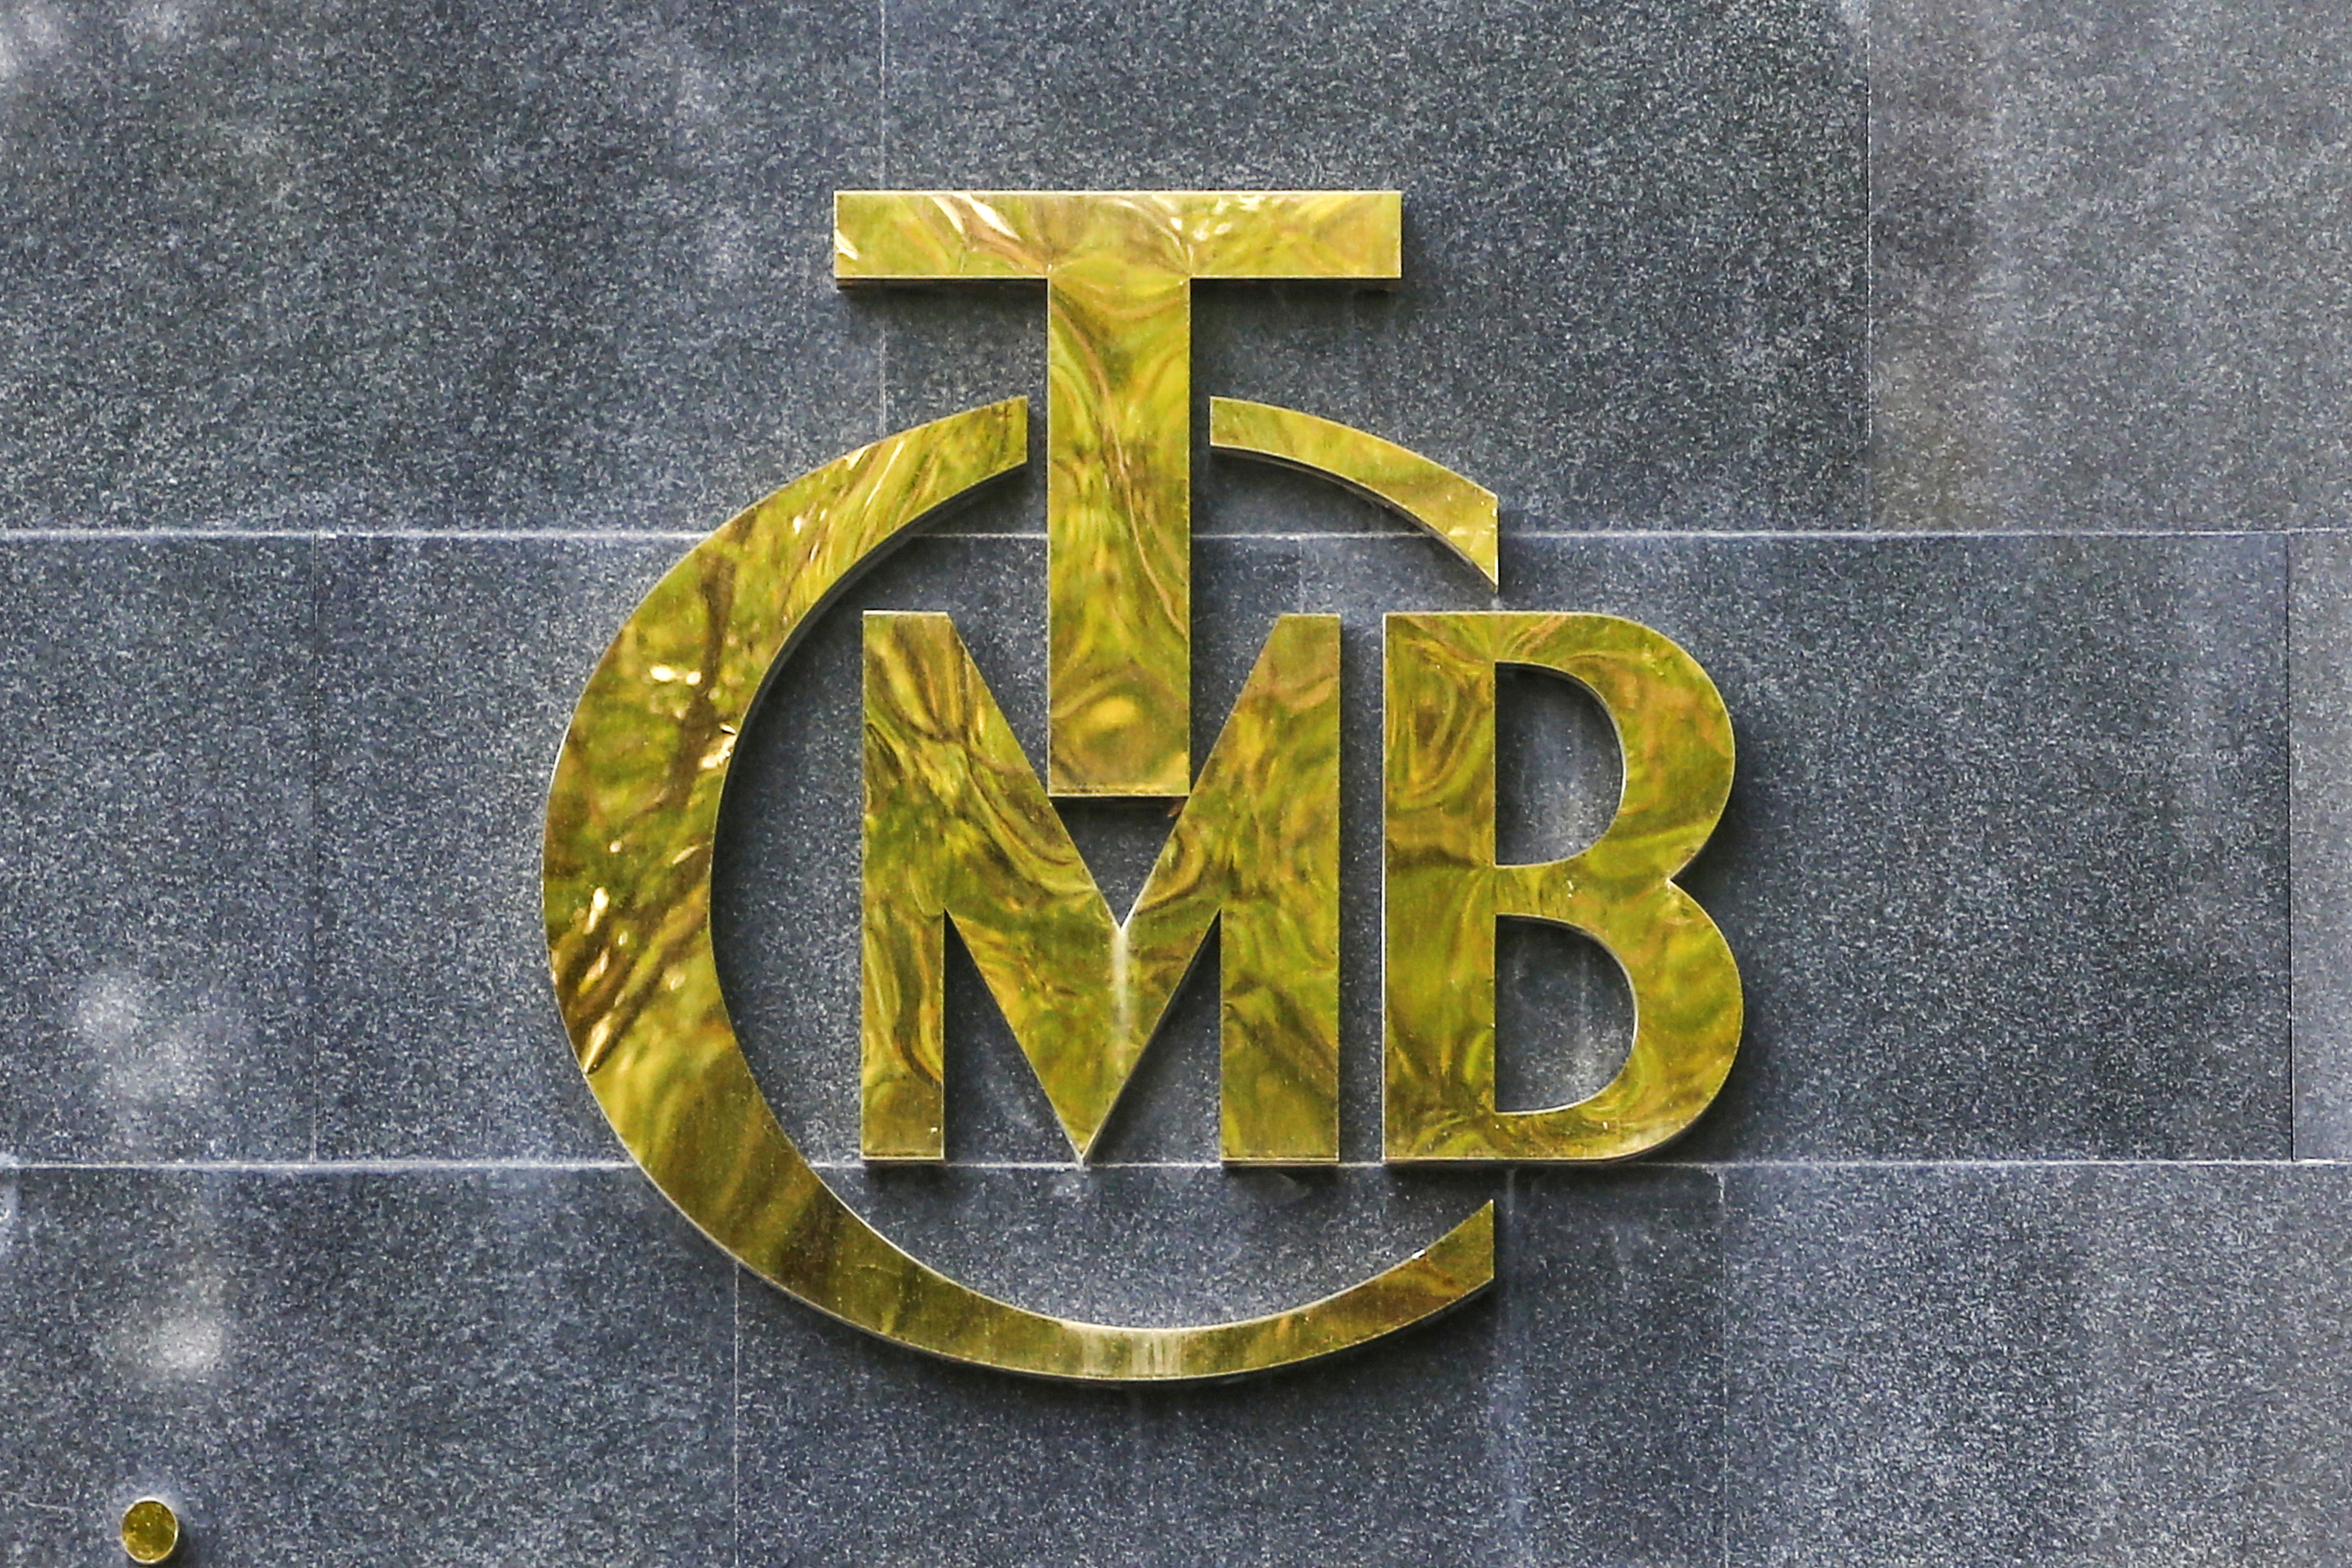 A logo of Turkey's Central Bank is pictured at the entrance of its headquarters in Ankara, Turkey October 15, 2021. REUTERS/Cagla Gurdogan